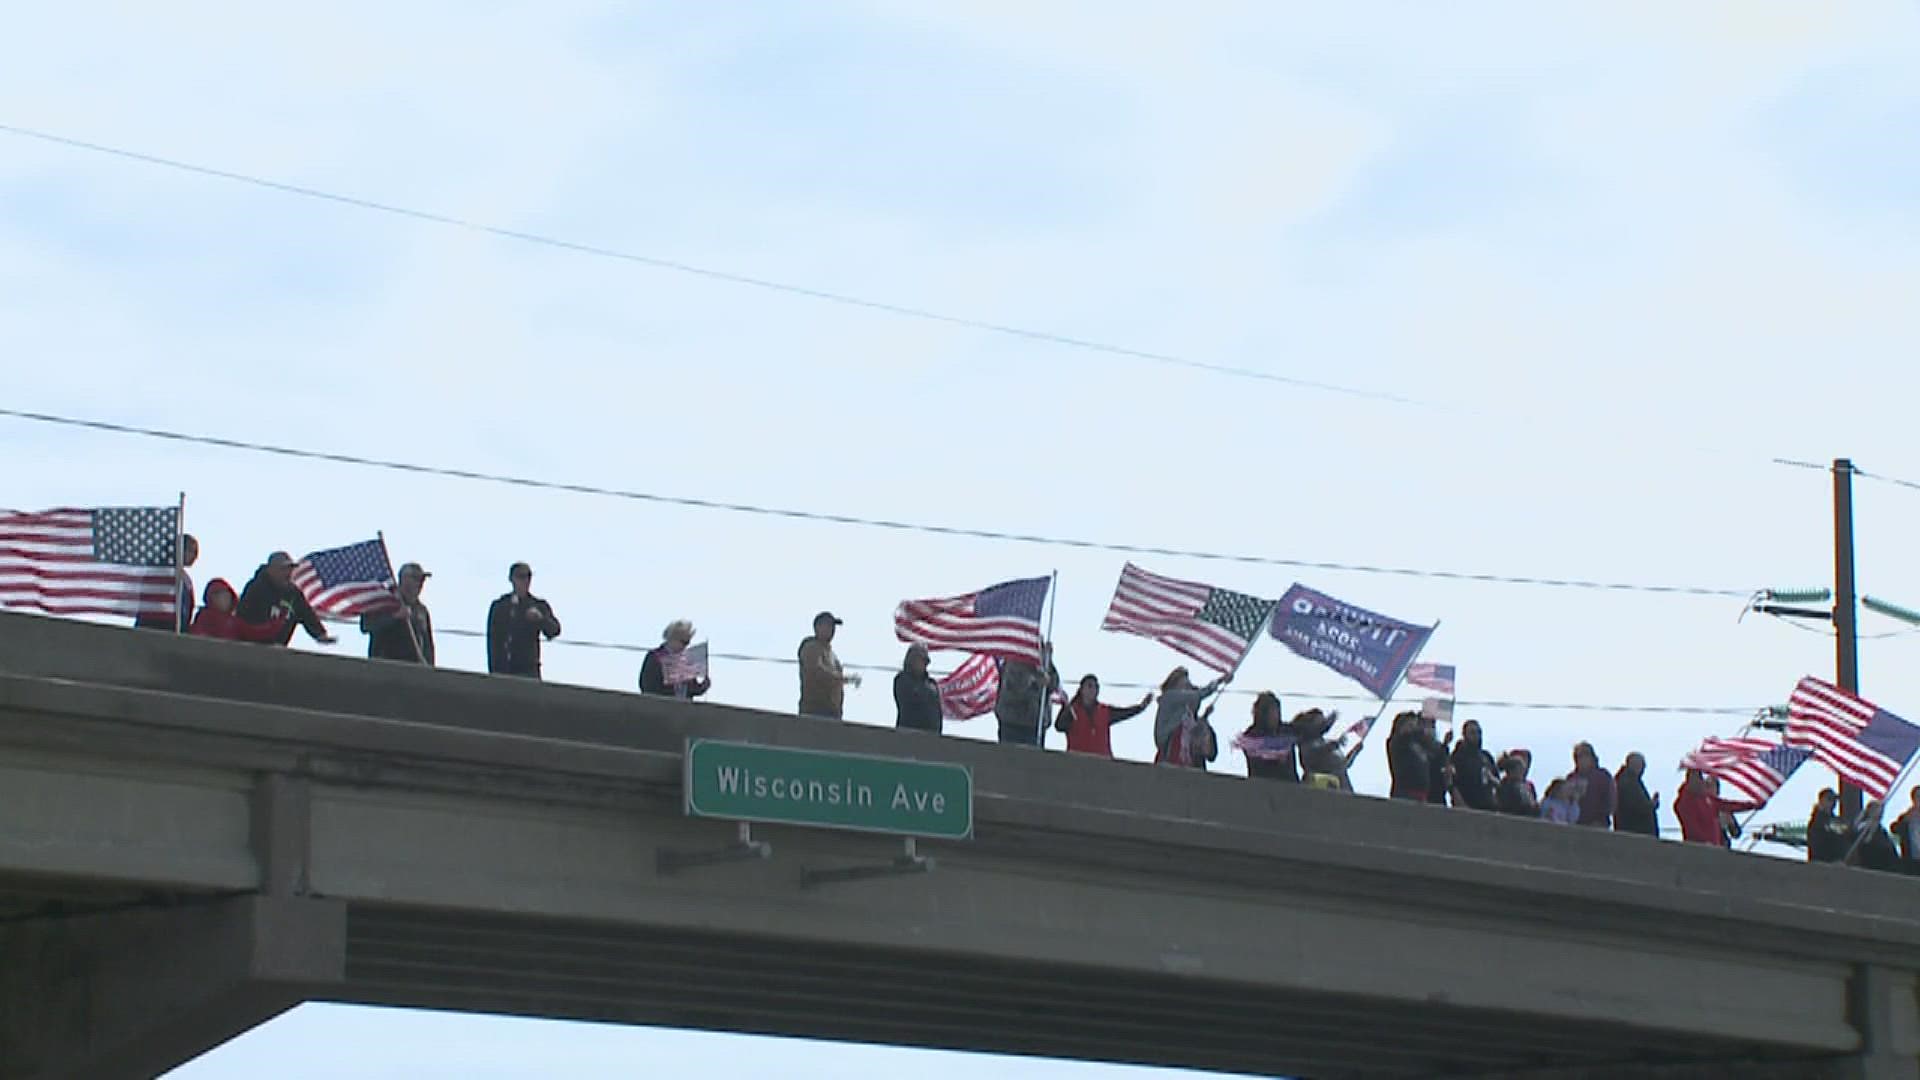 Hundreds of people stood on bridges across I-80 on Saturday  to support truckers protesting government mandates on their way to Washington D.C.